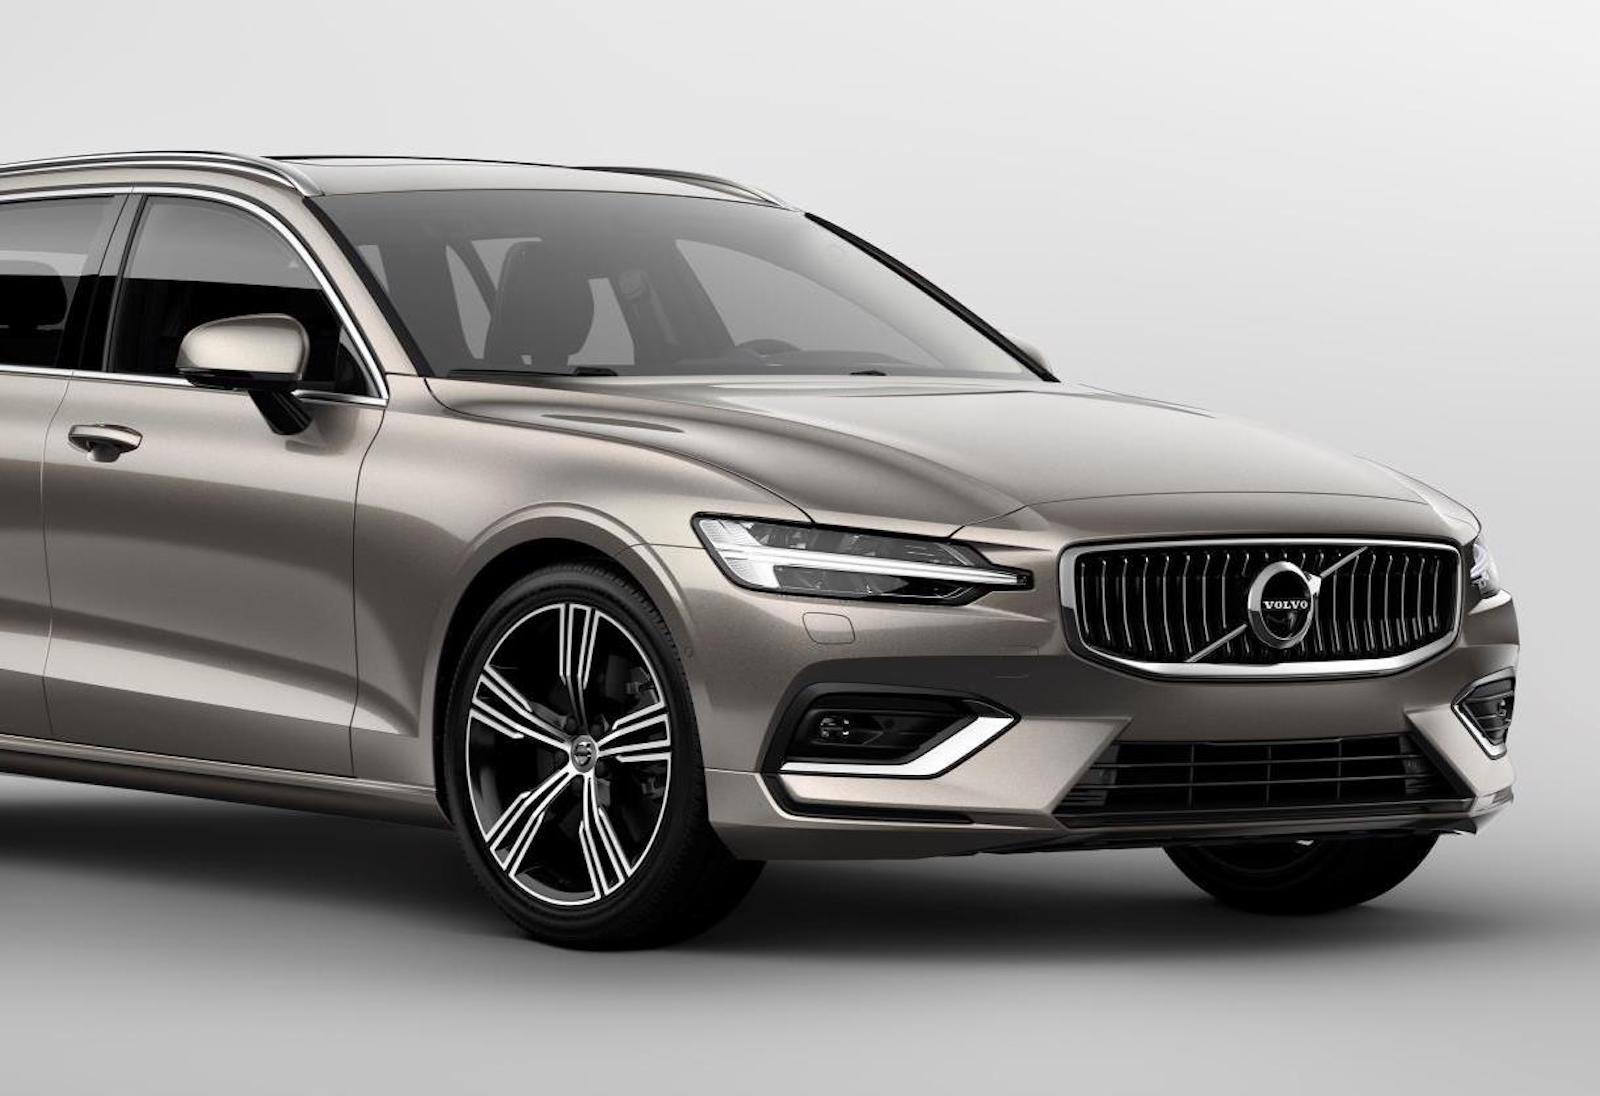 All-new 2019 Volvo S60 sedan to debut mid-year